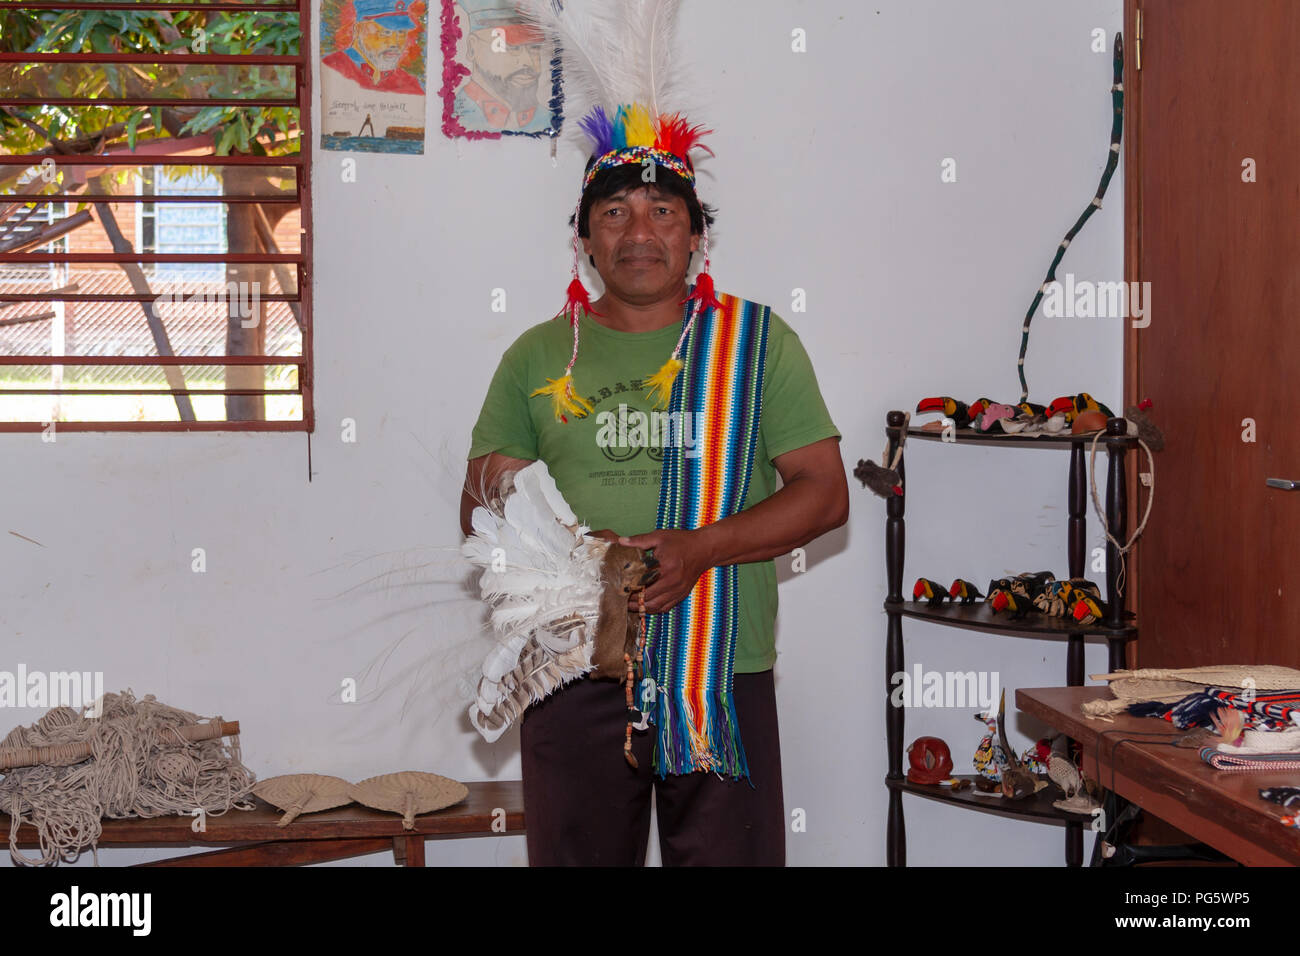 Portrait of Maka indian man with war bonnet showing handicrafts at the village on the outskirts of Asuncion, Paraguay Stock Photo